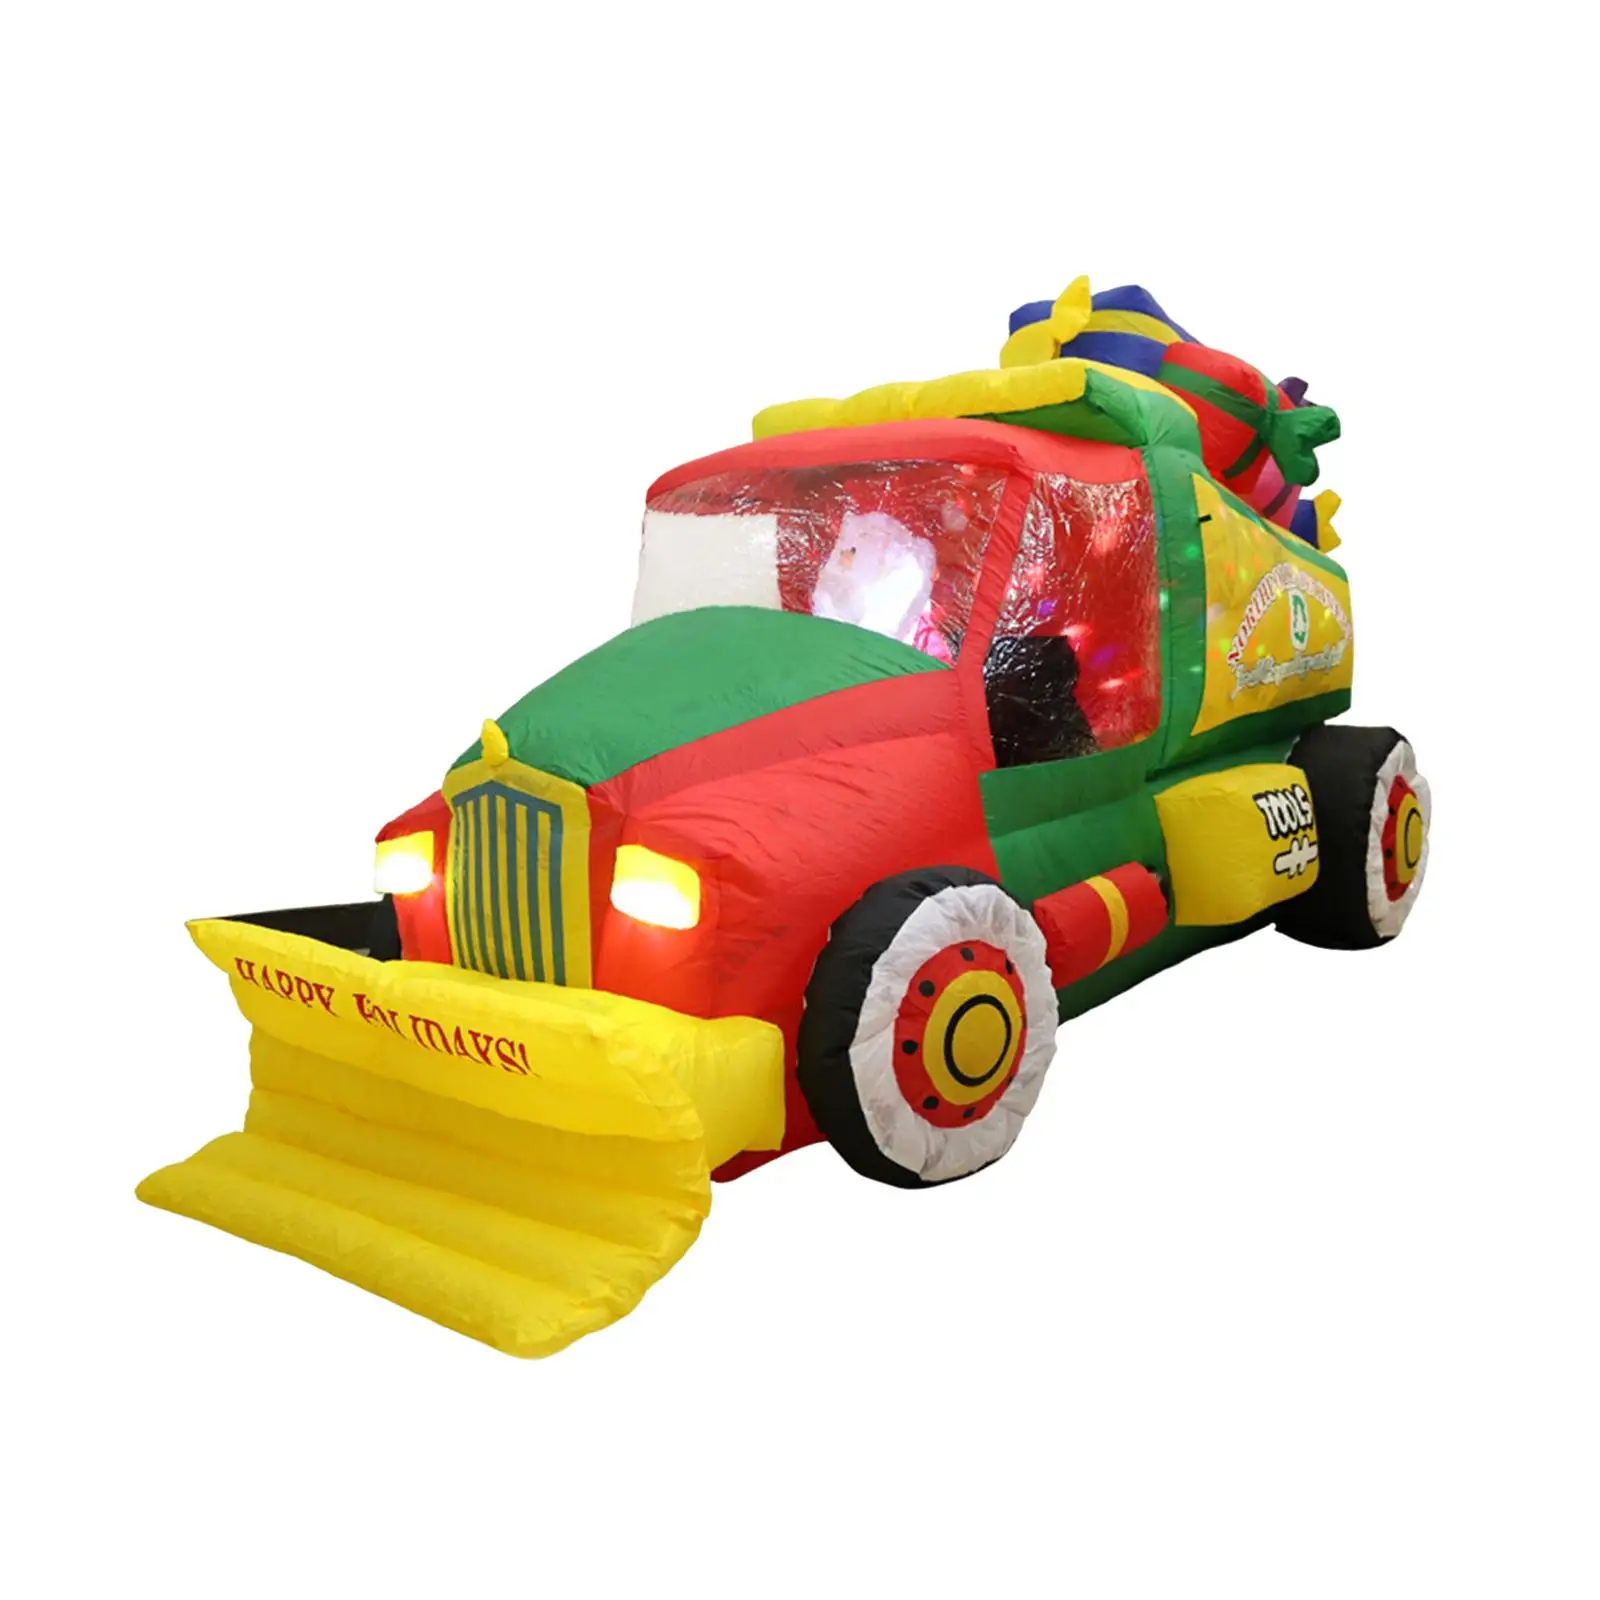 Inflatable Snow Plow Xmas Cute Outdoor Decorations Ornaments for Backyard